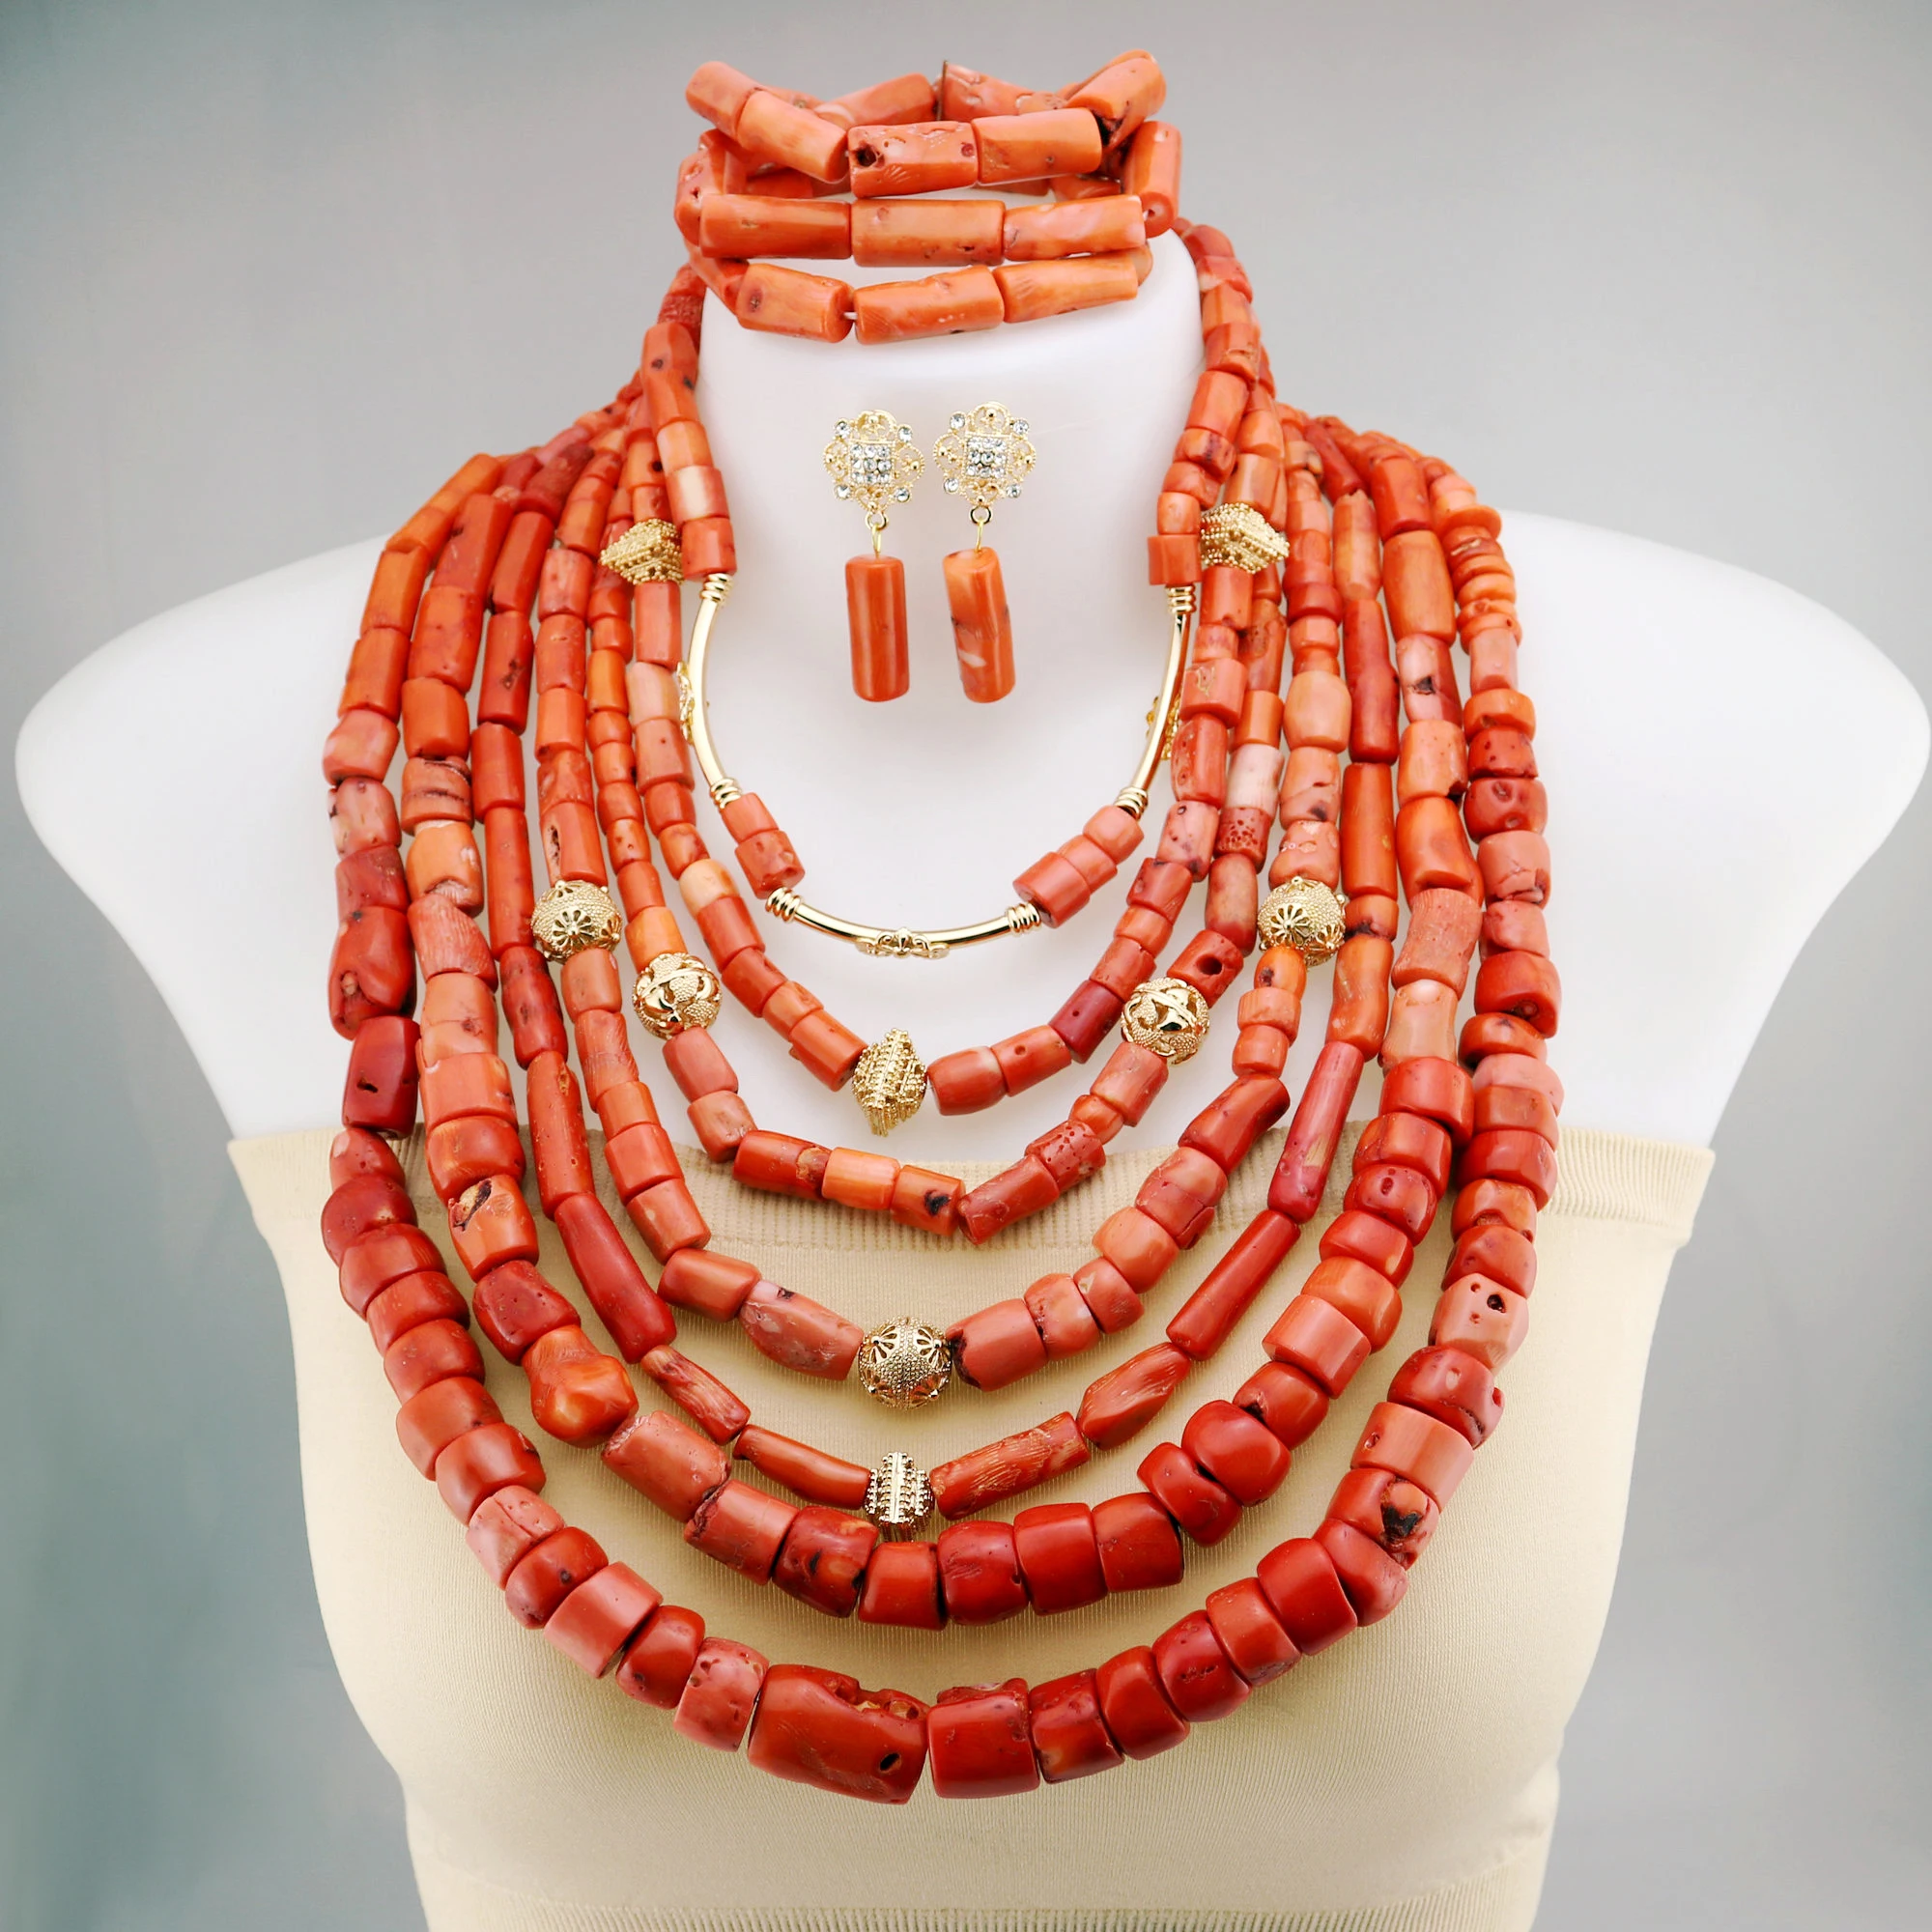 

Nigerian popular bridal african wedding coral beads jewelry set fashion necklace jewelry set for women, Pink,blue,silver ,grey,purple